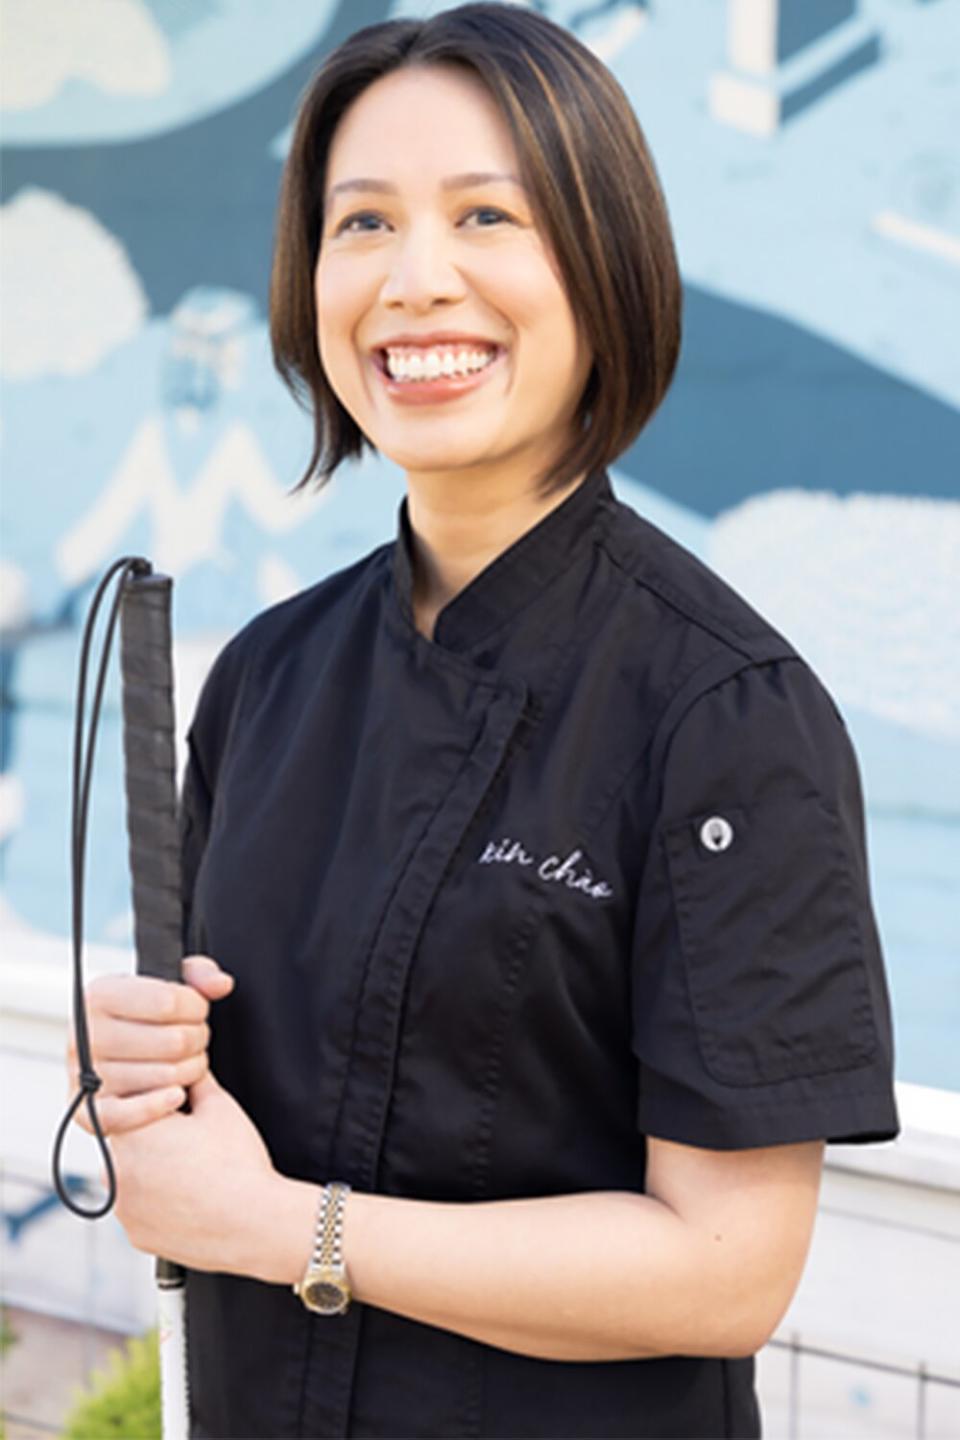 Chef Christine Ha Where was the image taken – Houston, Texas (at her restaurants, Xin Chào and the Blind Goat) When was the image taken – January 2022 Who took the photograph – Rocky Kneten Full credit line – Courtesy of Horizon Therapeutics